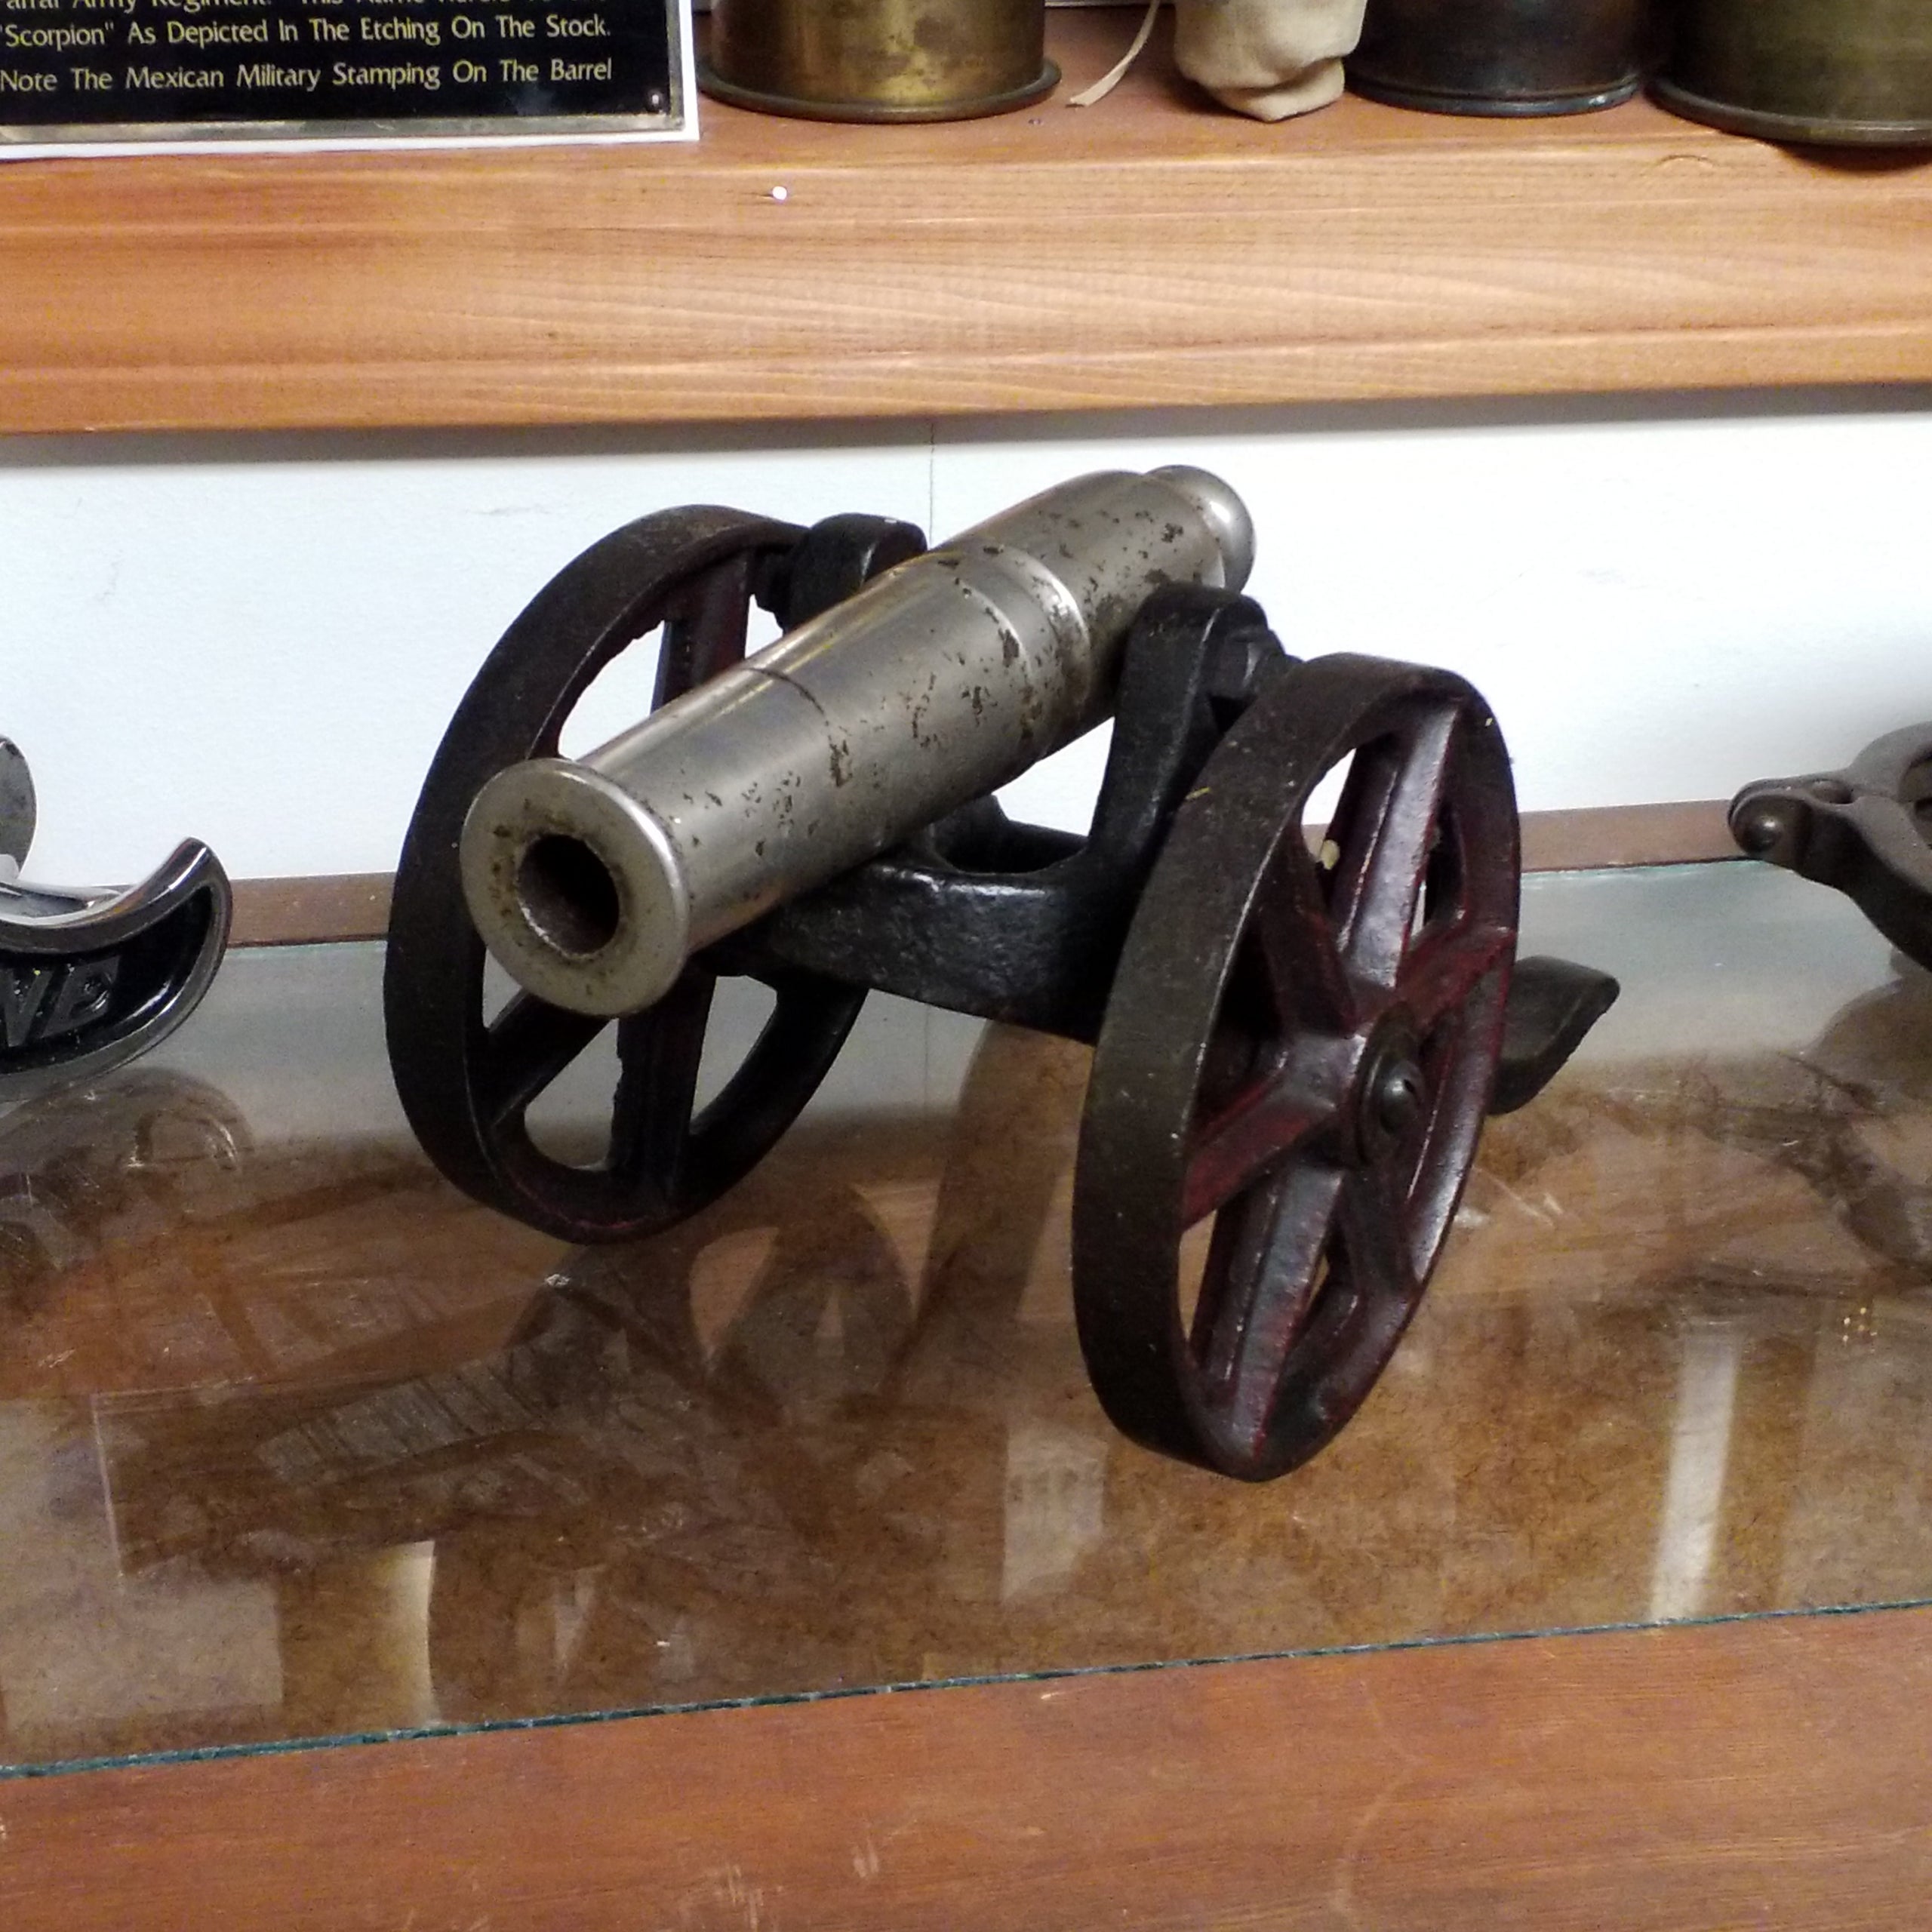 Remember the Maine Cannon